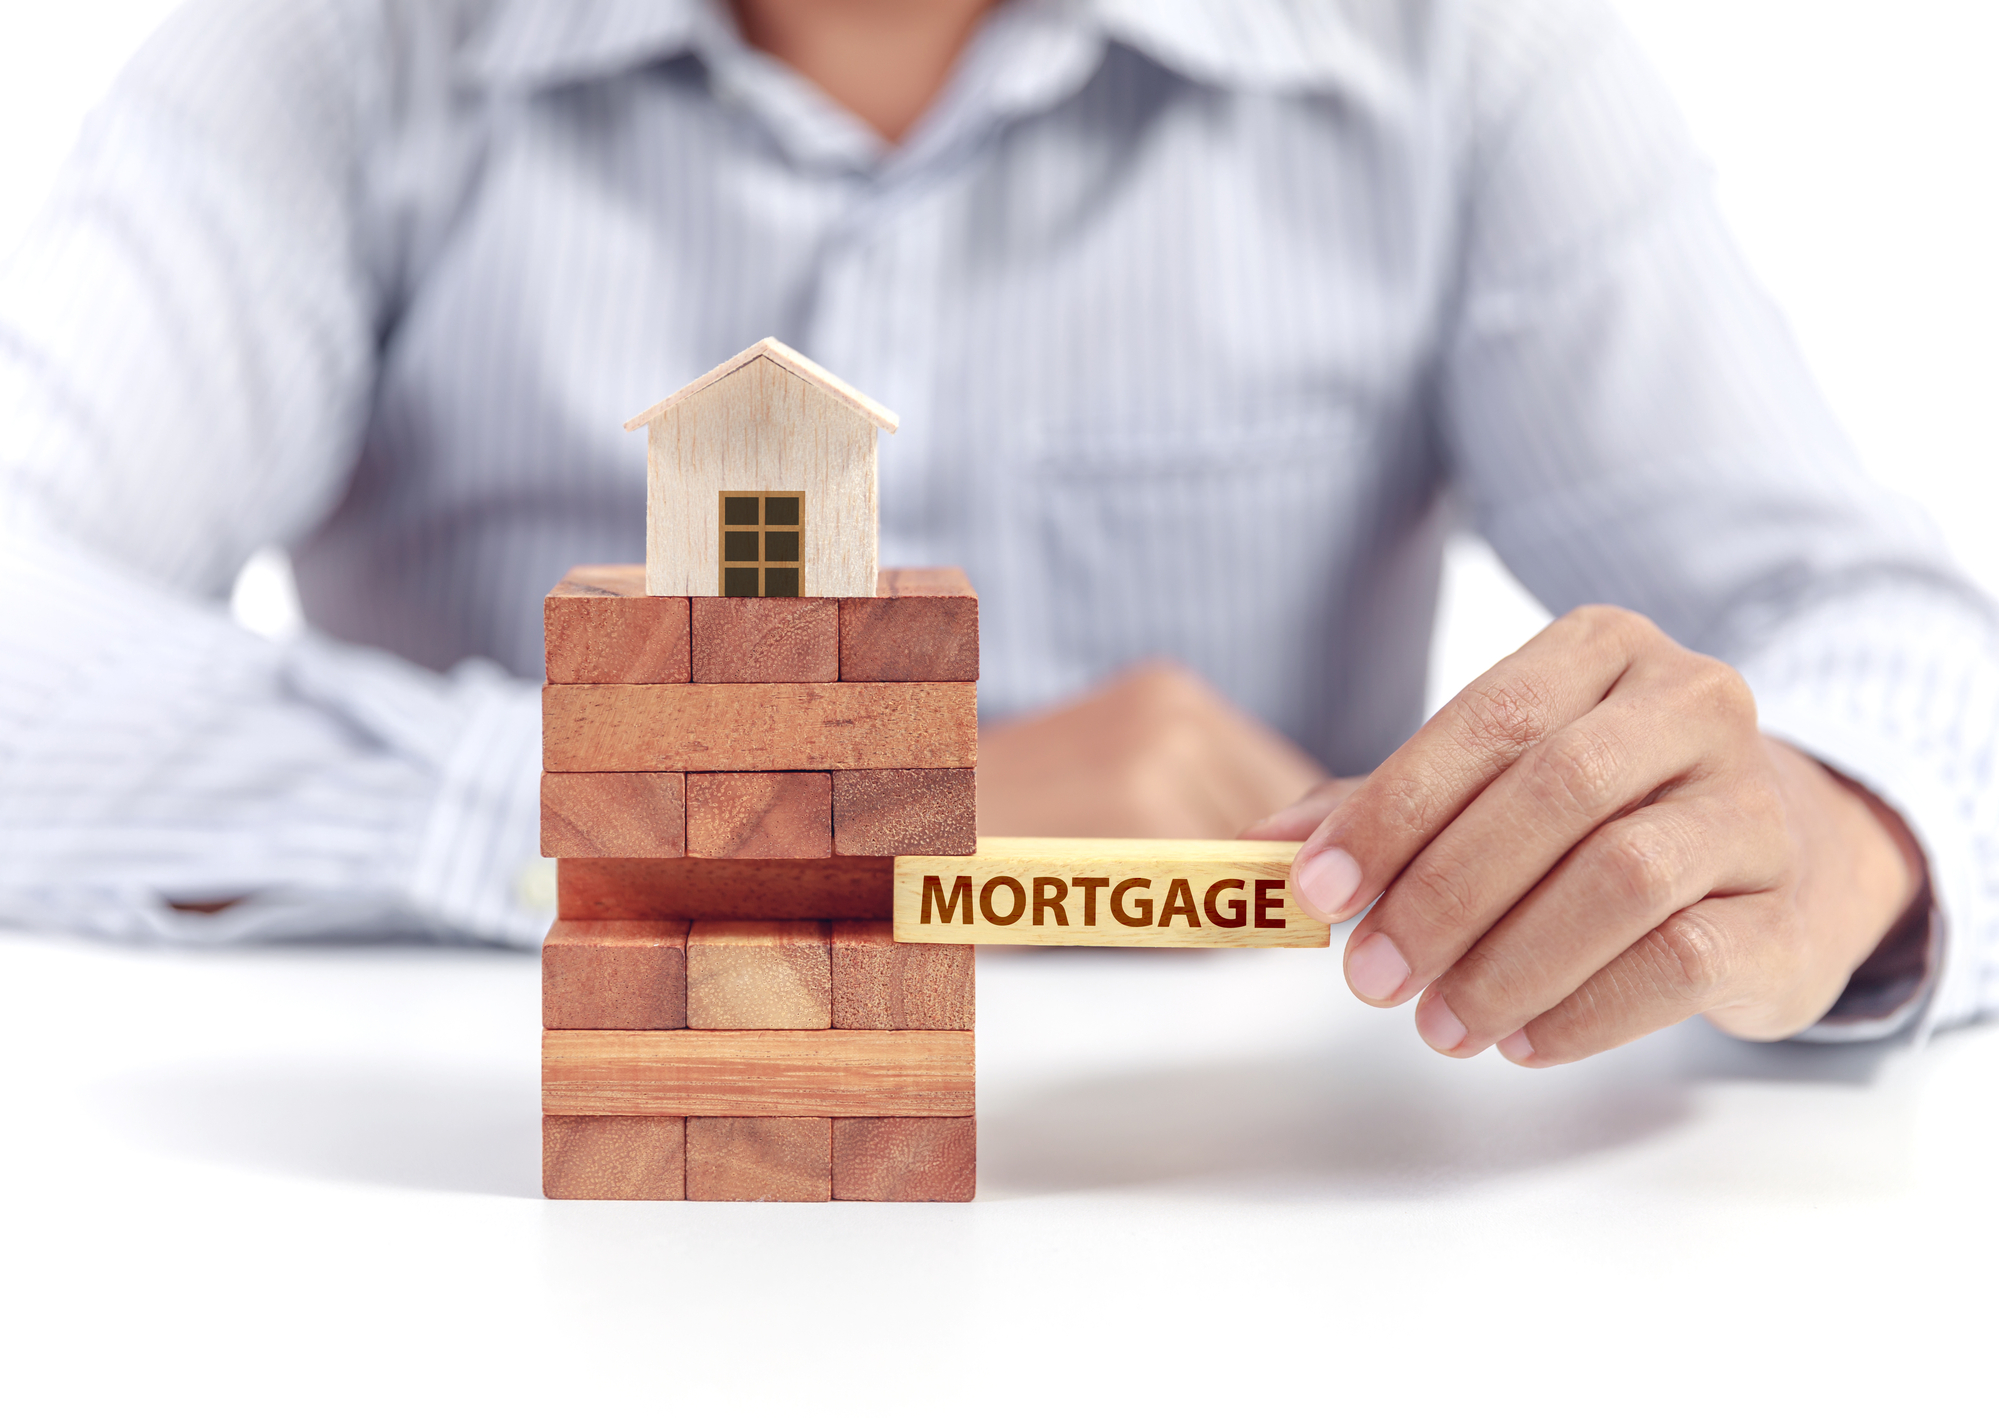 New-stress-test-mortgage-rules